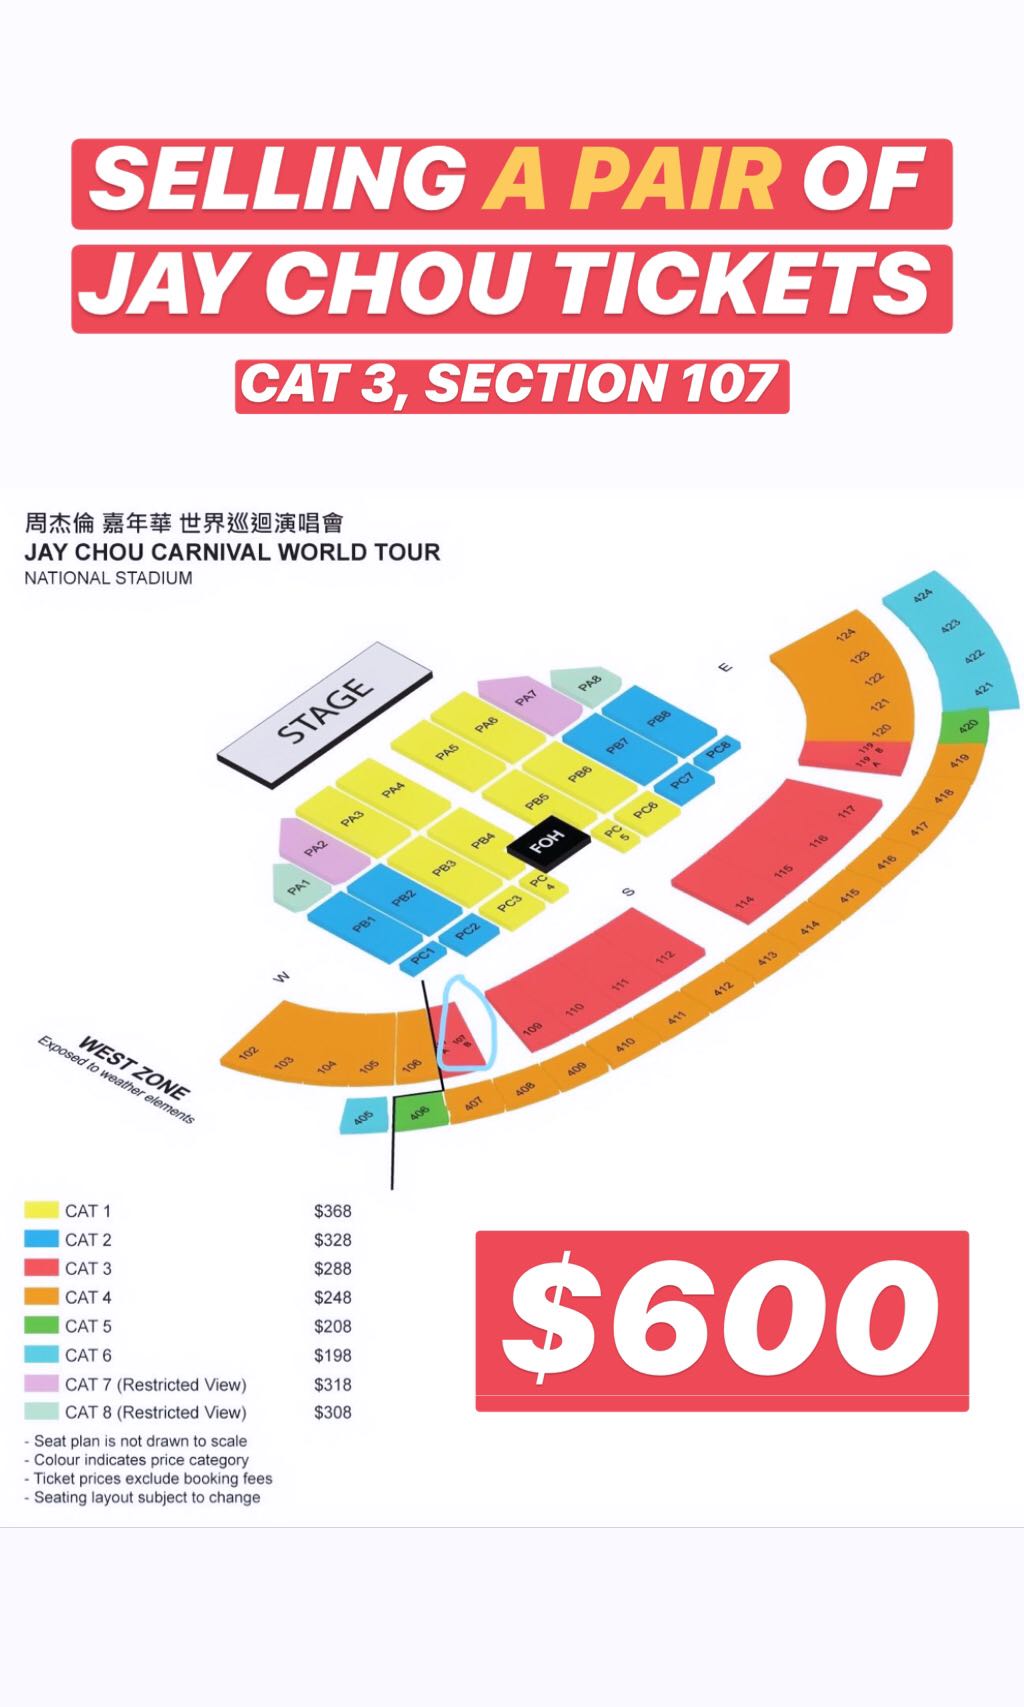 Jay chou concert ticket, Tickets & Vouchers, Event Tickets on Carousell